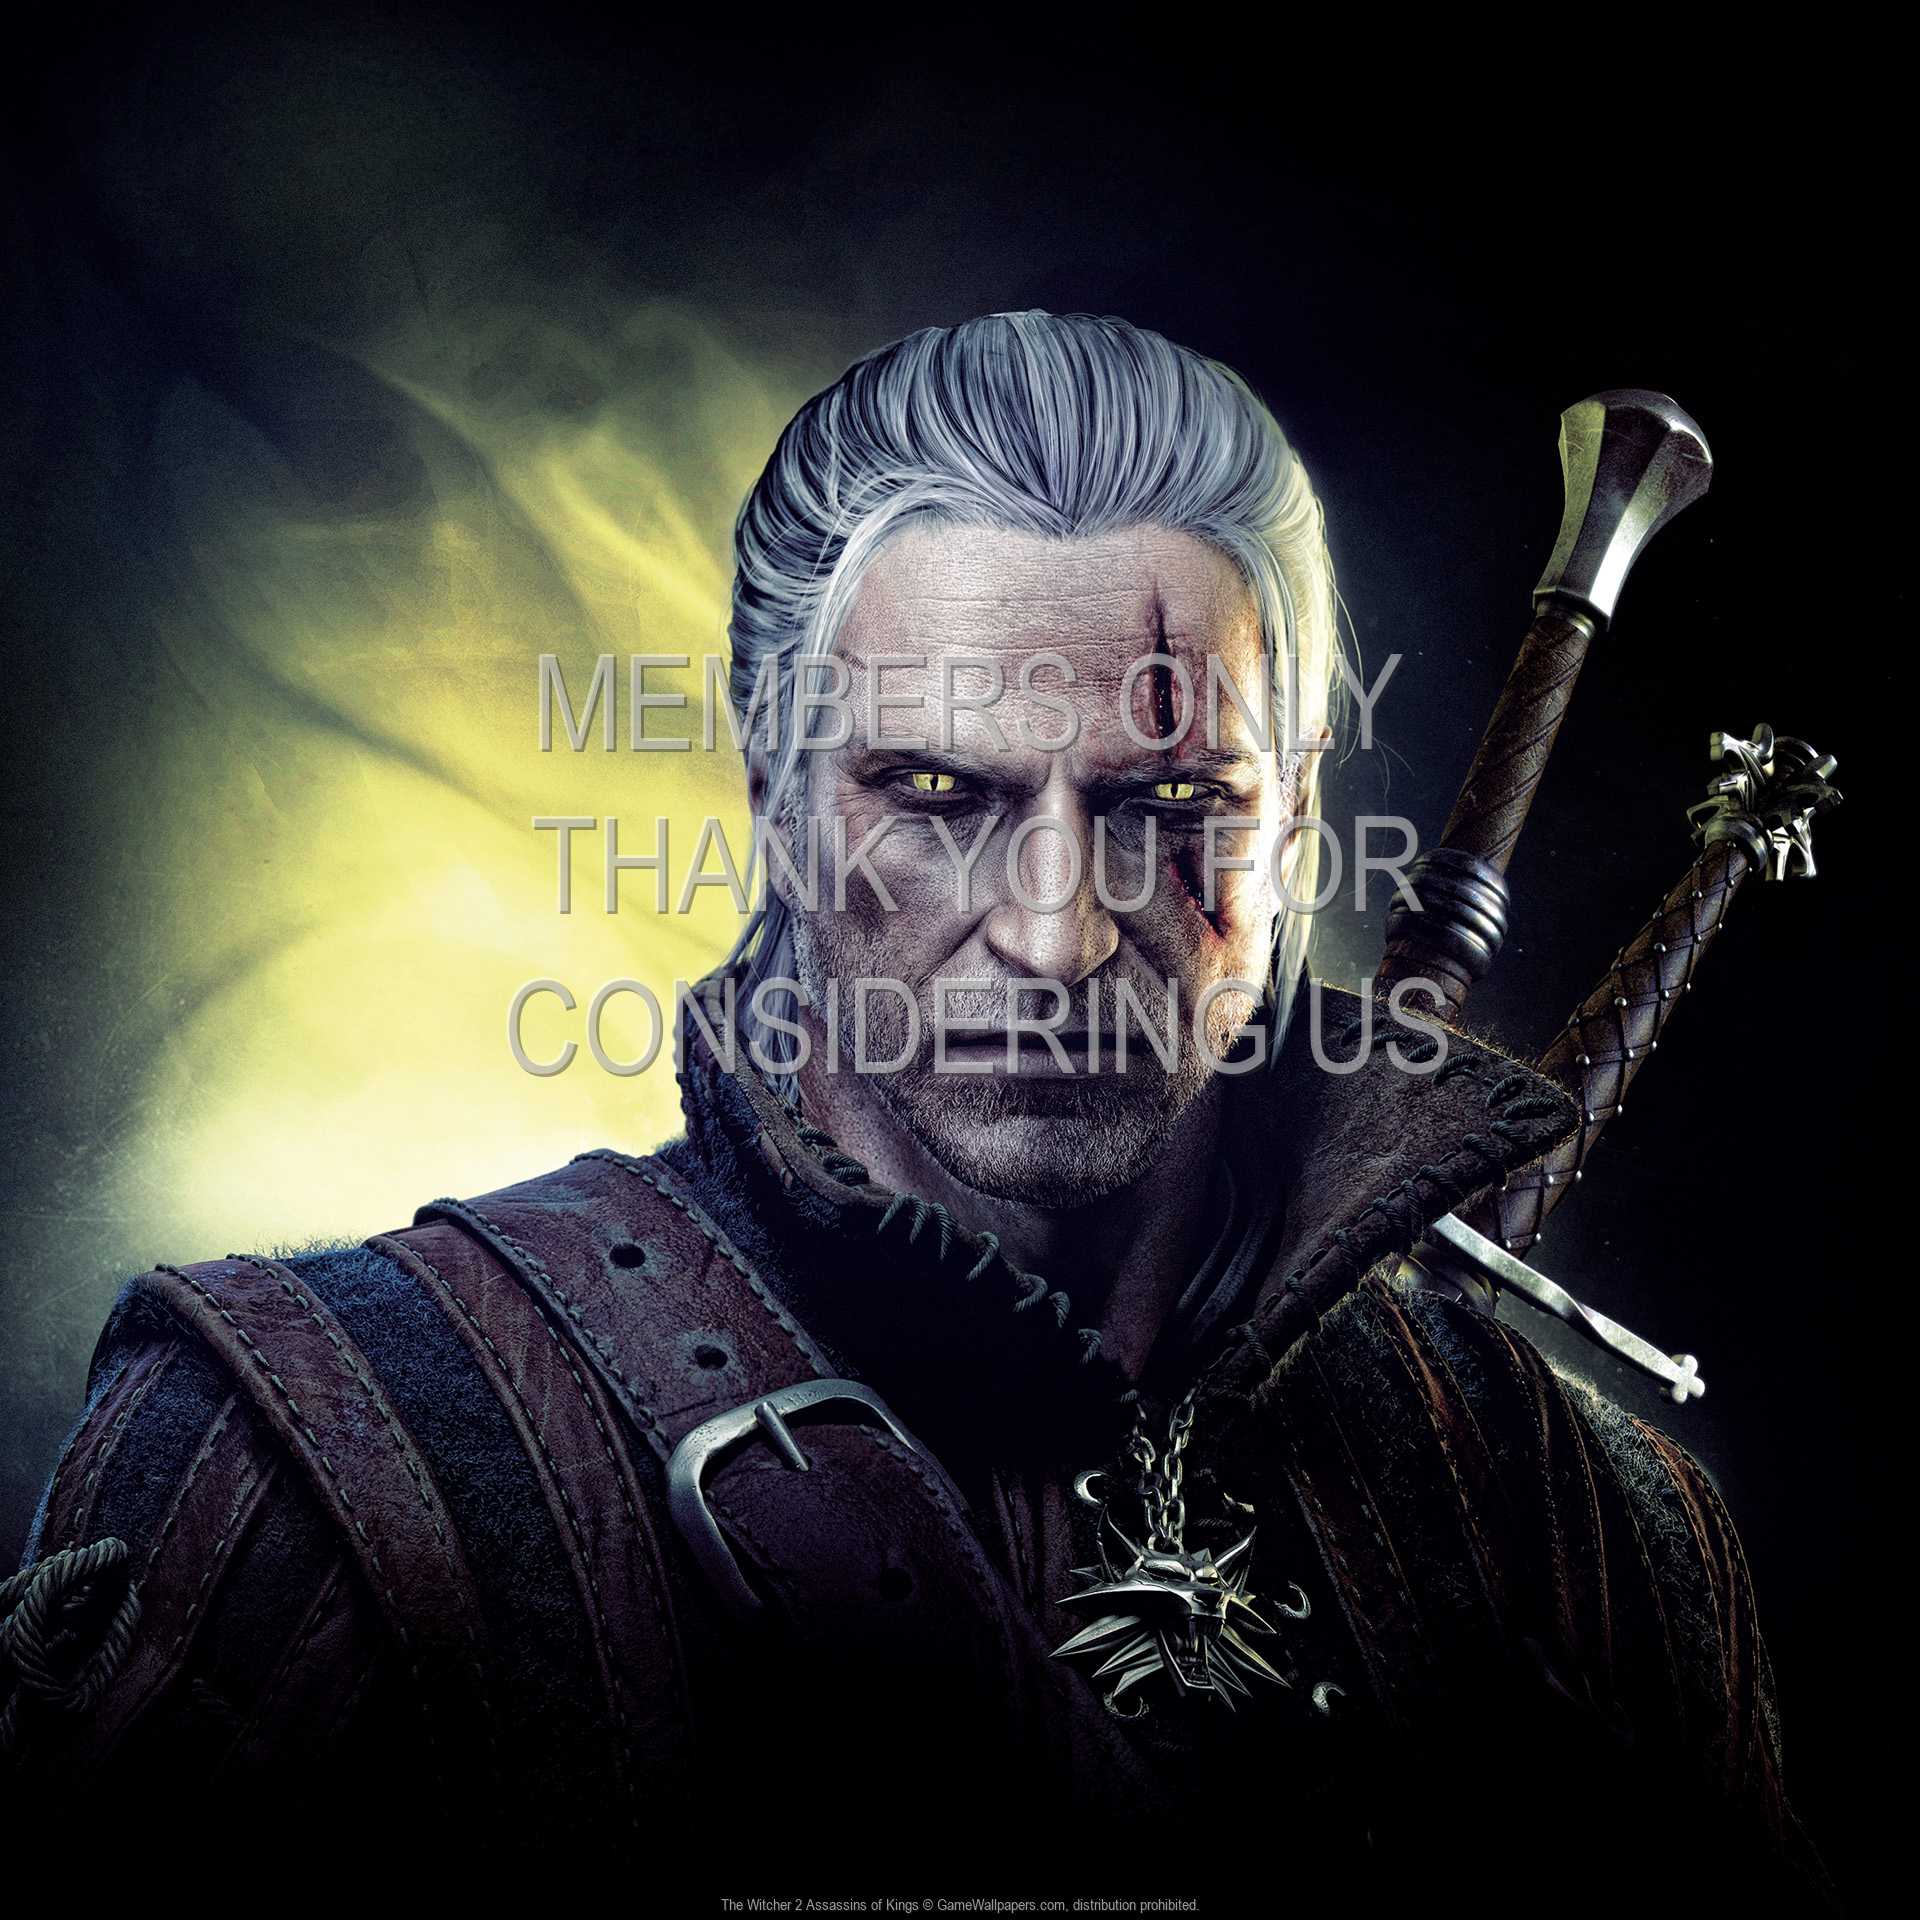 The Witcher 2: Assassins of Kings 1080p Horizontal Mobile fond d'cran 09